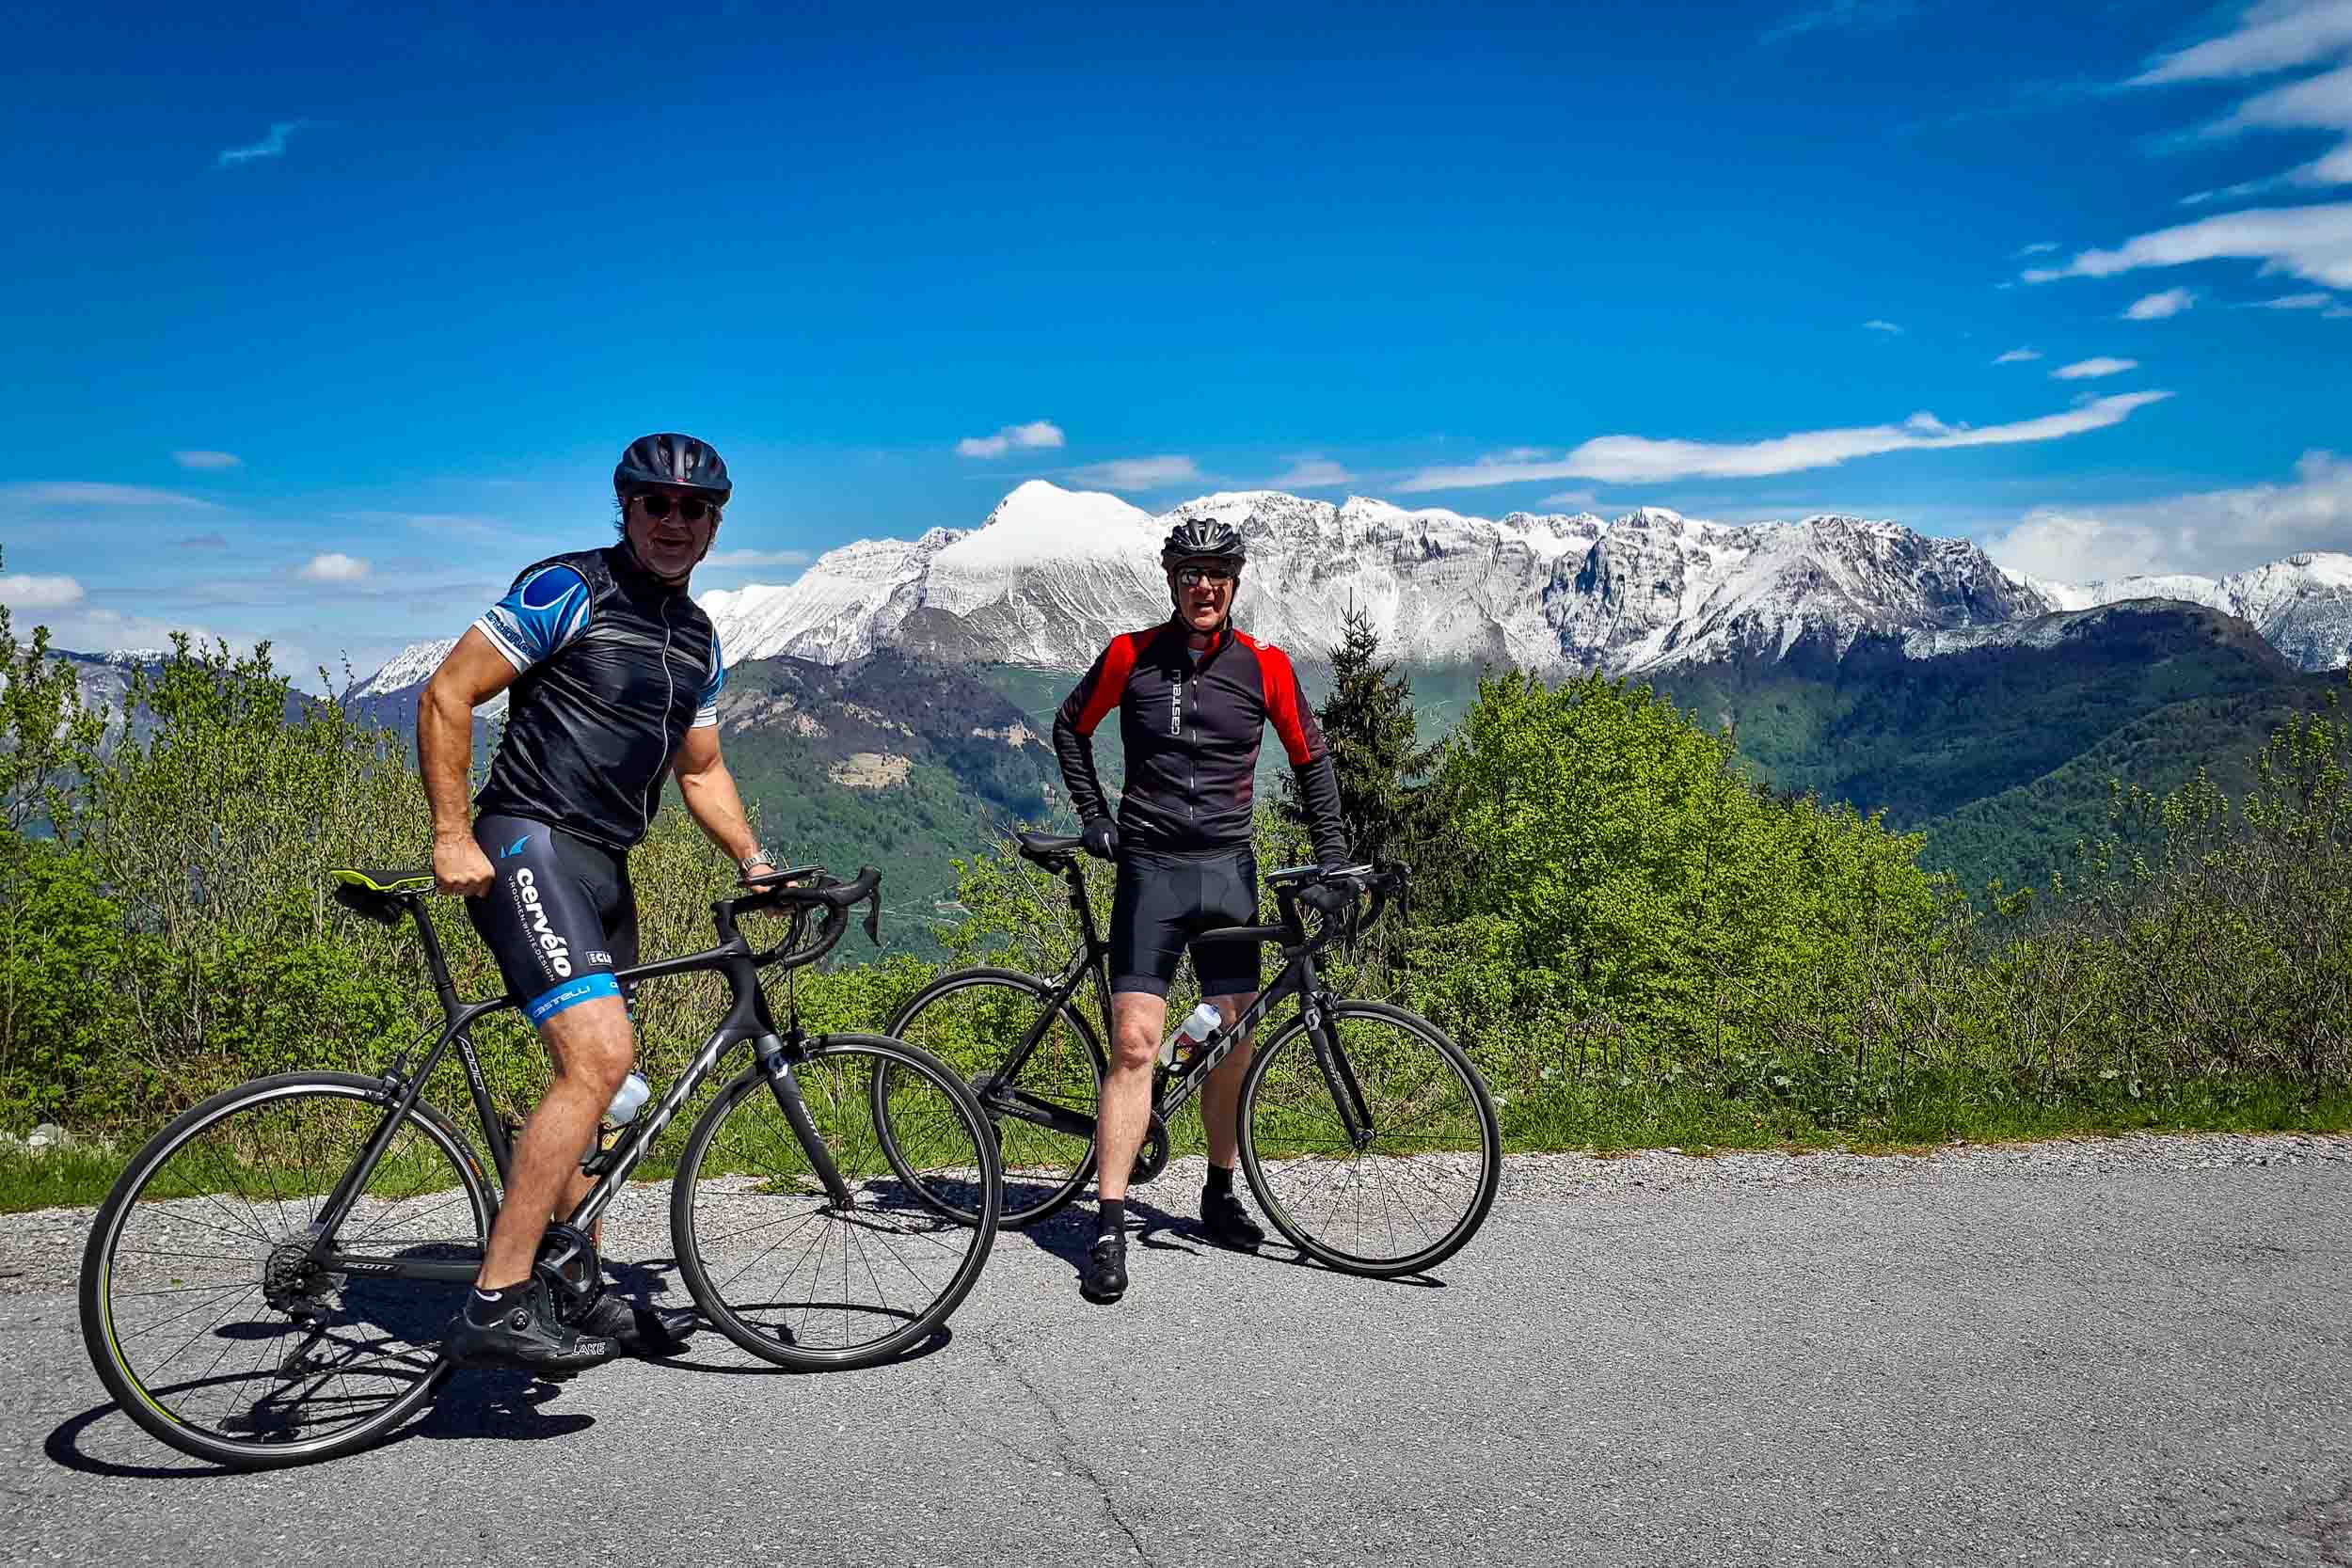 Two road cyclists on a quiet asphalt road biking from the Soca Valley to the Goriska Brda wine region in Slovenia with snowcapped Mt. Krn in the background